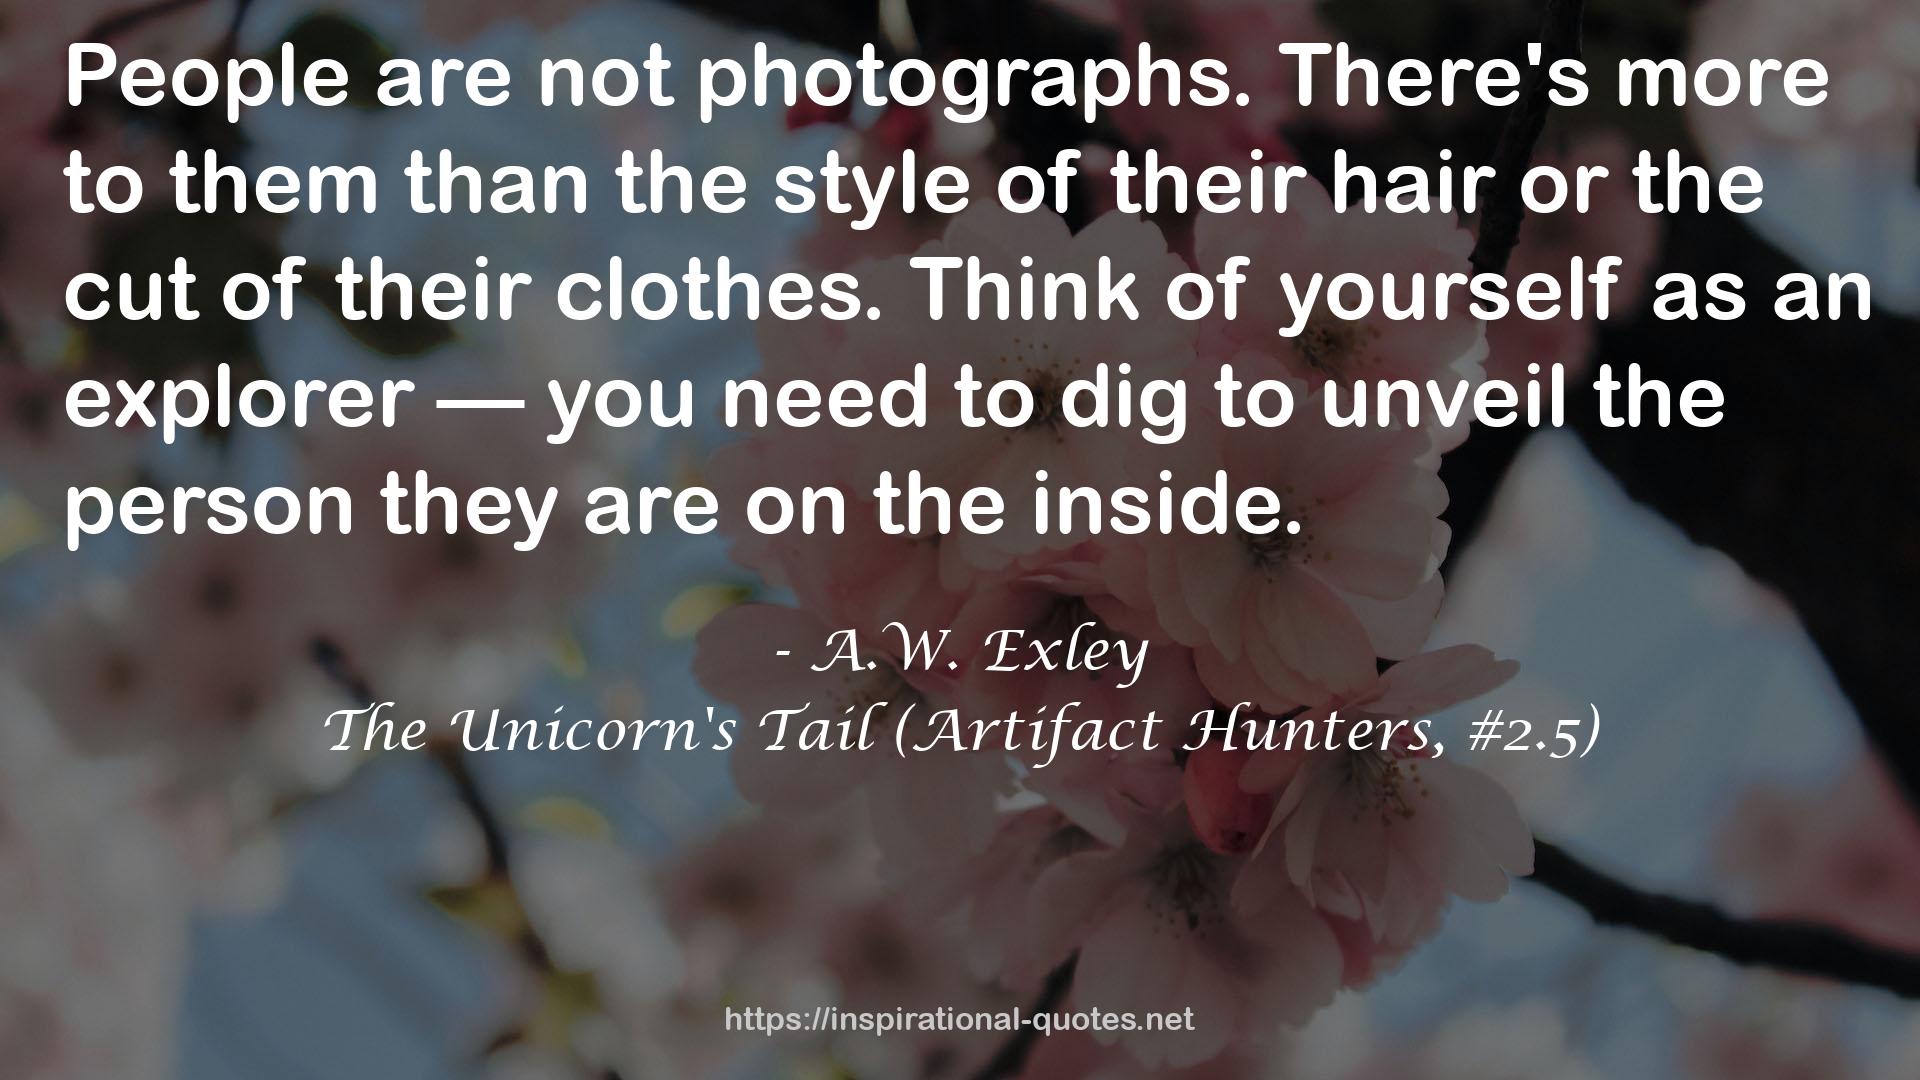 The Unicorn's Tail (Artifact Hunters, #2.5) QUOTES